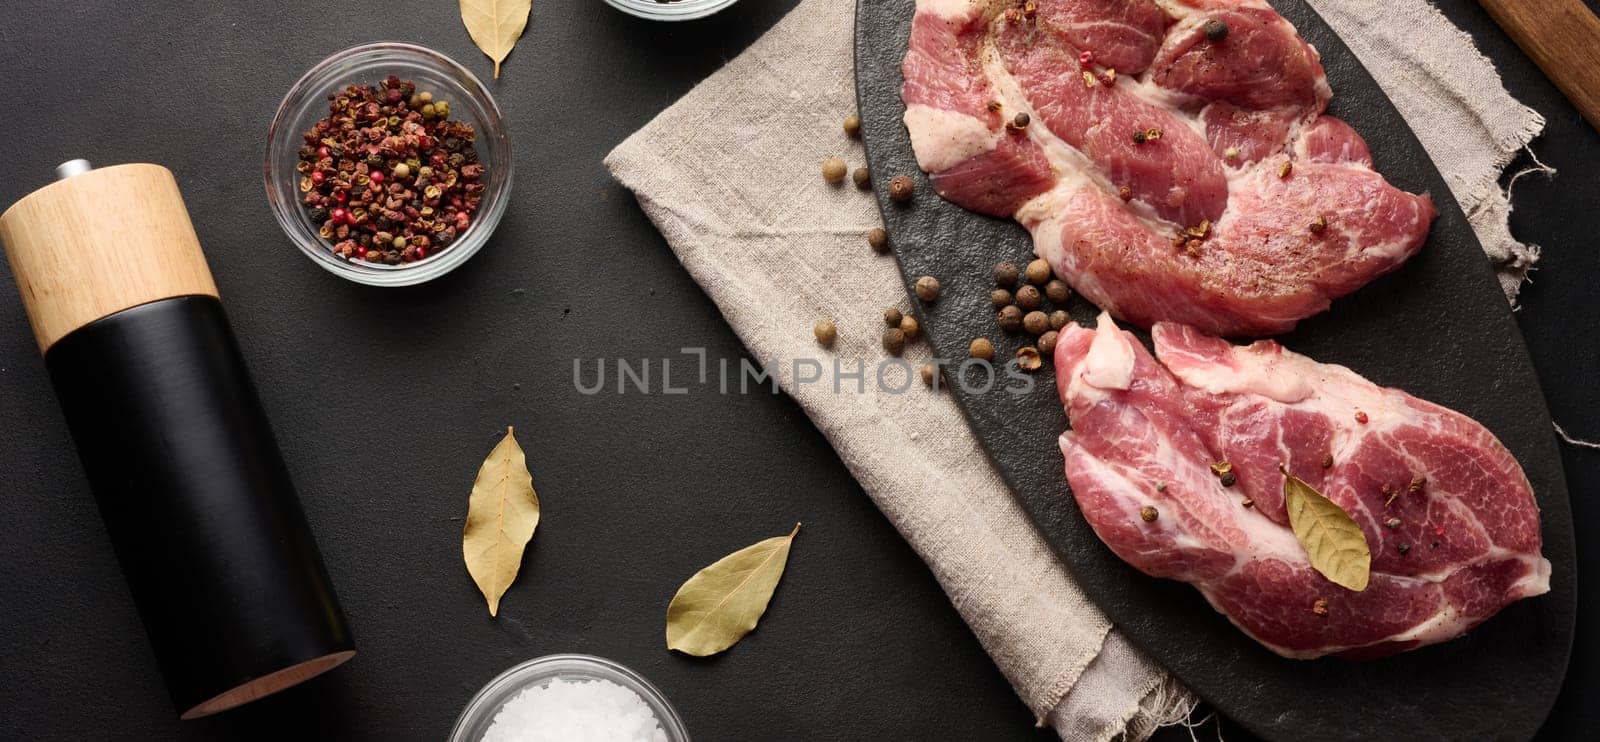 Two raw pork neck steaks on a board and spices for cooking. Top view of black table